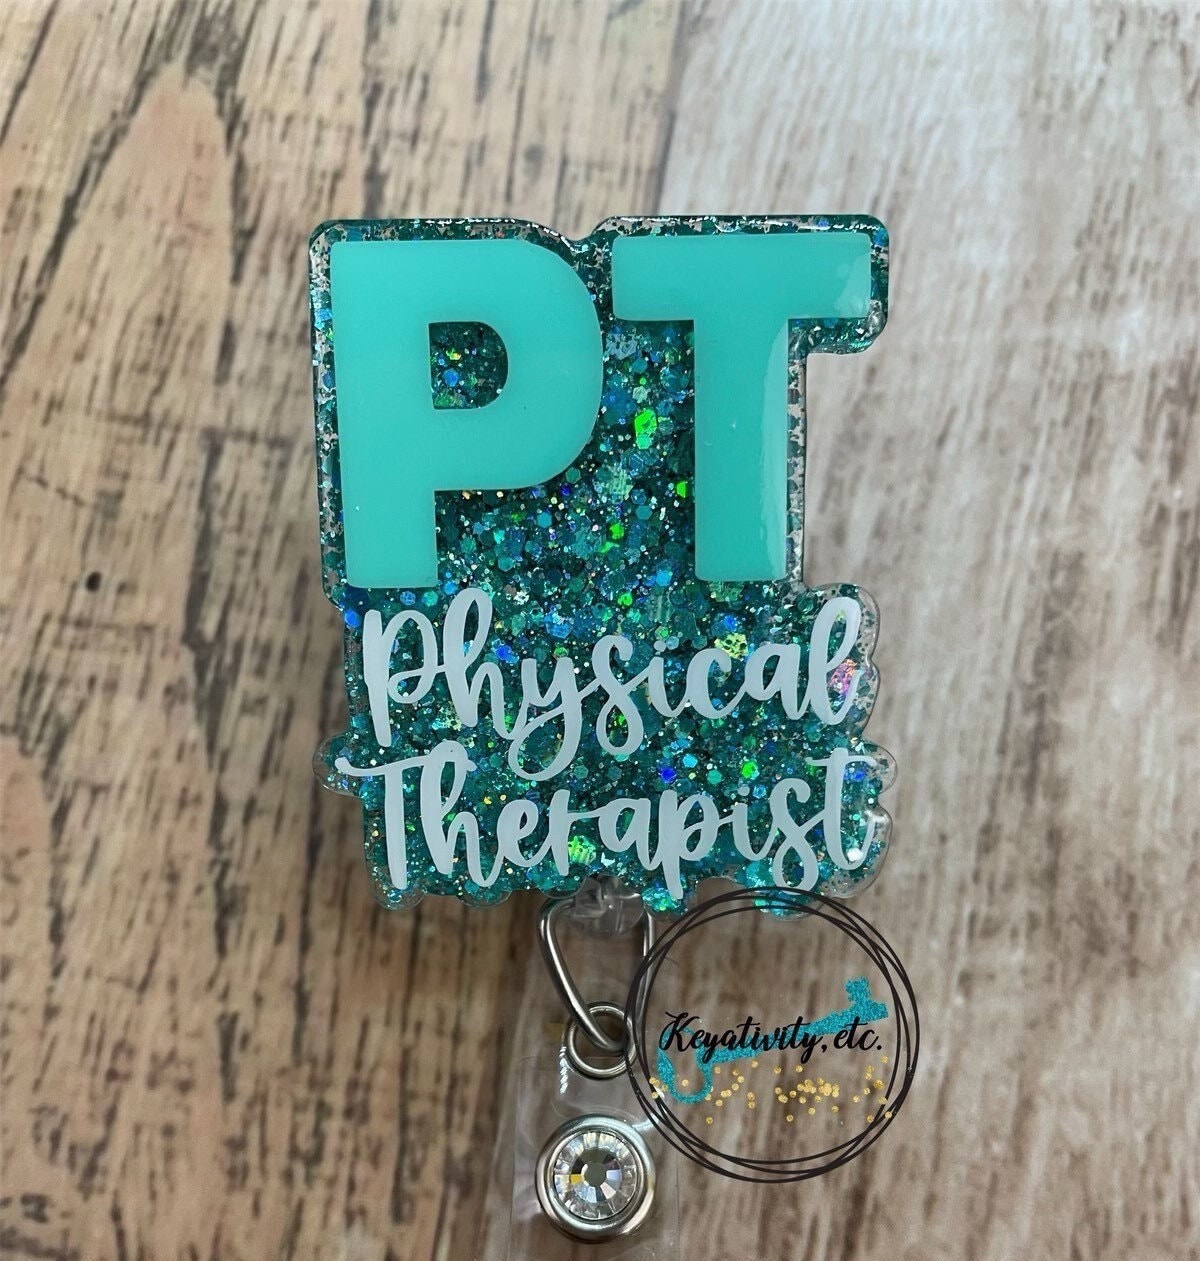 Physical Therapy Badge Reel, Glitter Rn Id Holder, Retractable